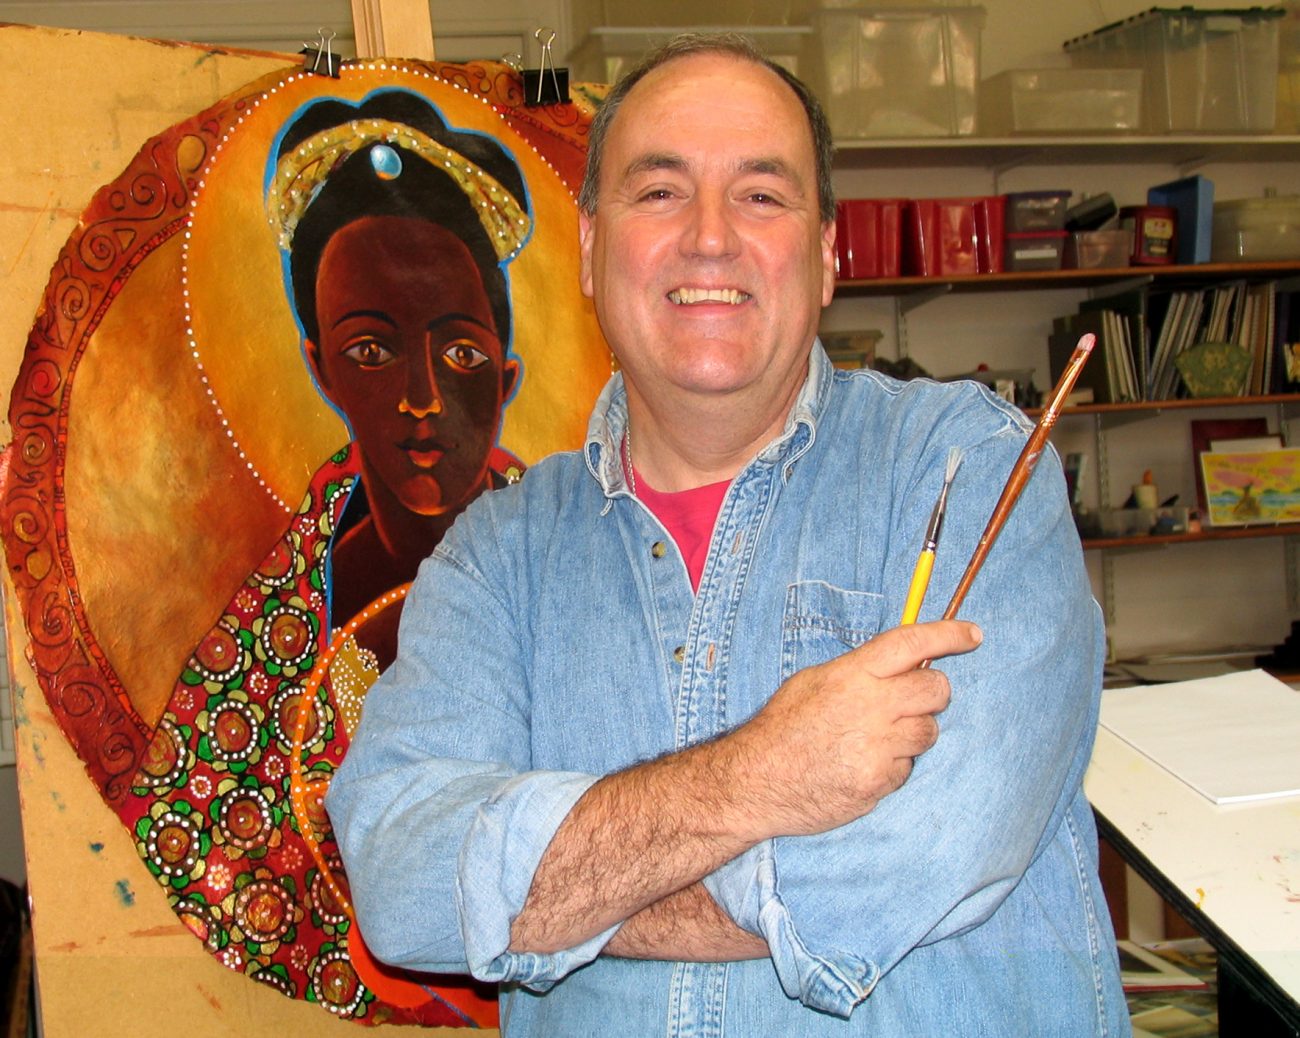 Oblate Brother Mickey McGrath, an acclaimed liturgical artist, is using his talents to foster healing and justice in the struggle against racism. (Photo courtesy of Brother Mickey McGrath, O.S.F.S.)